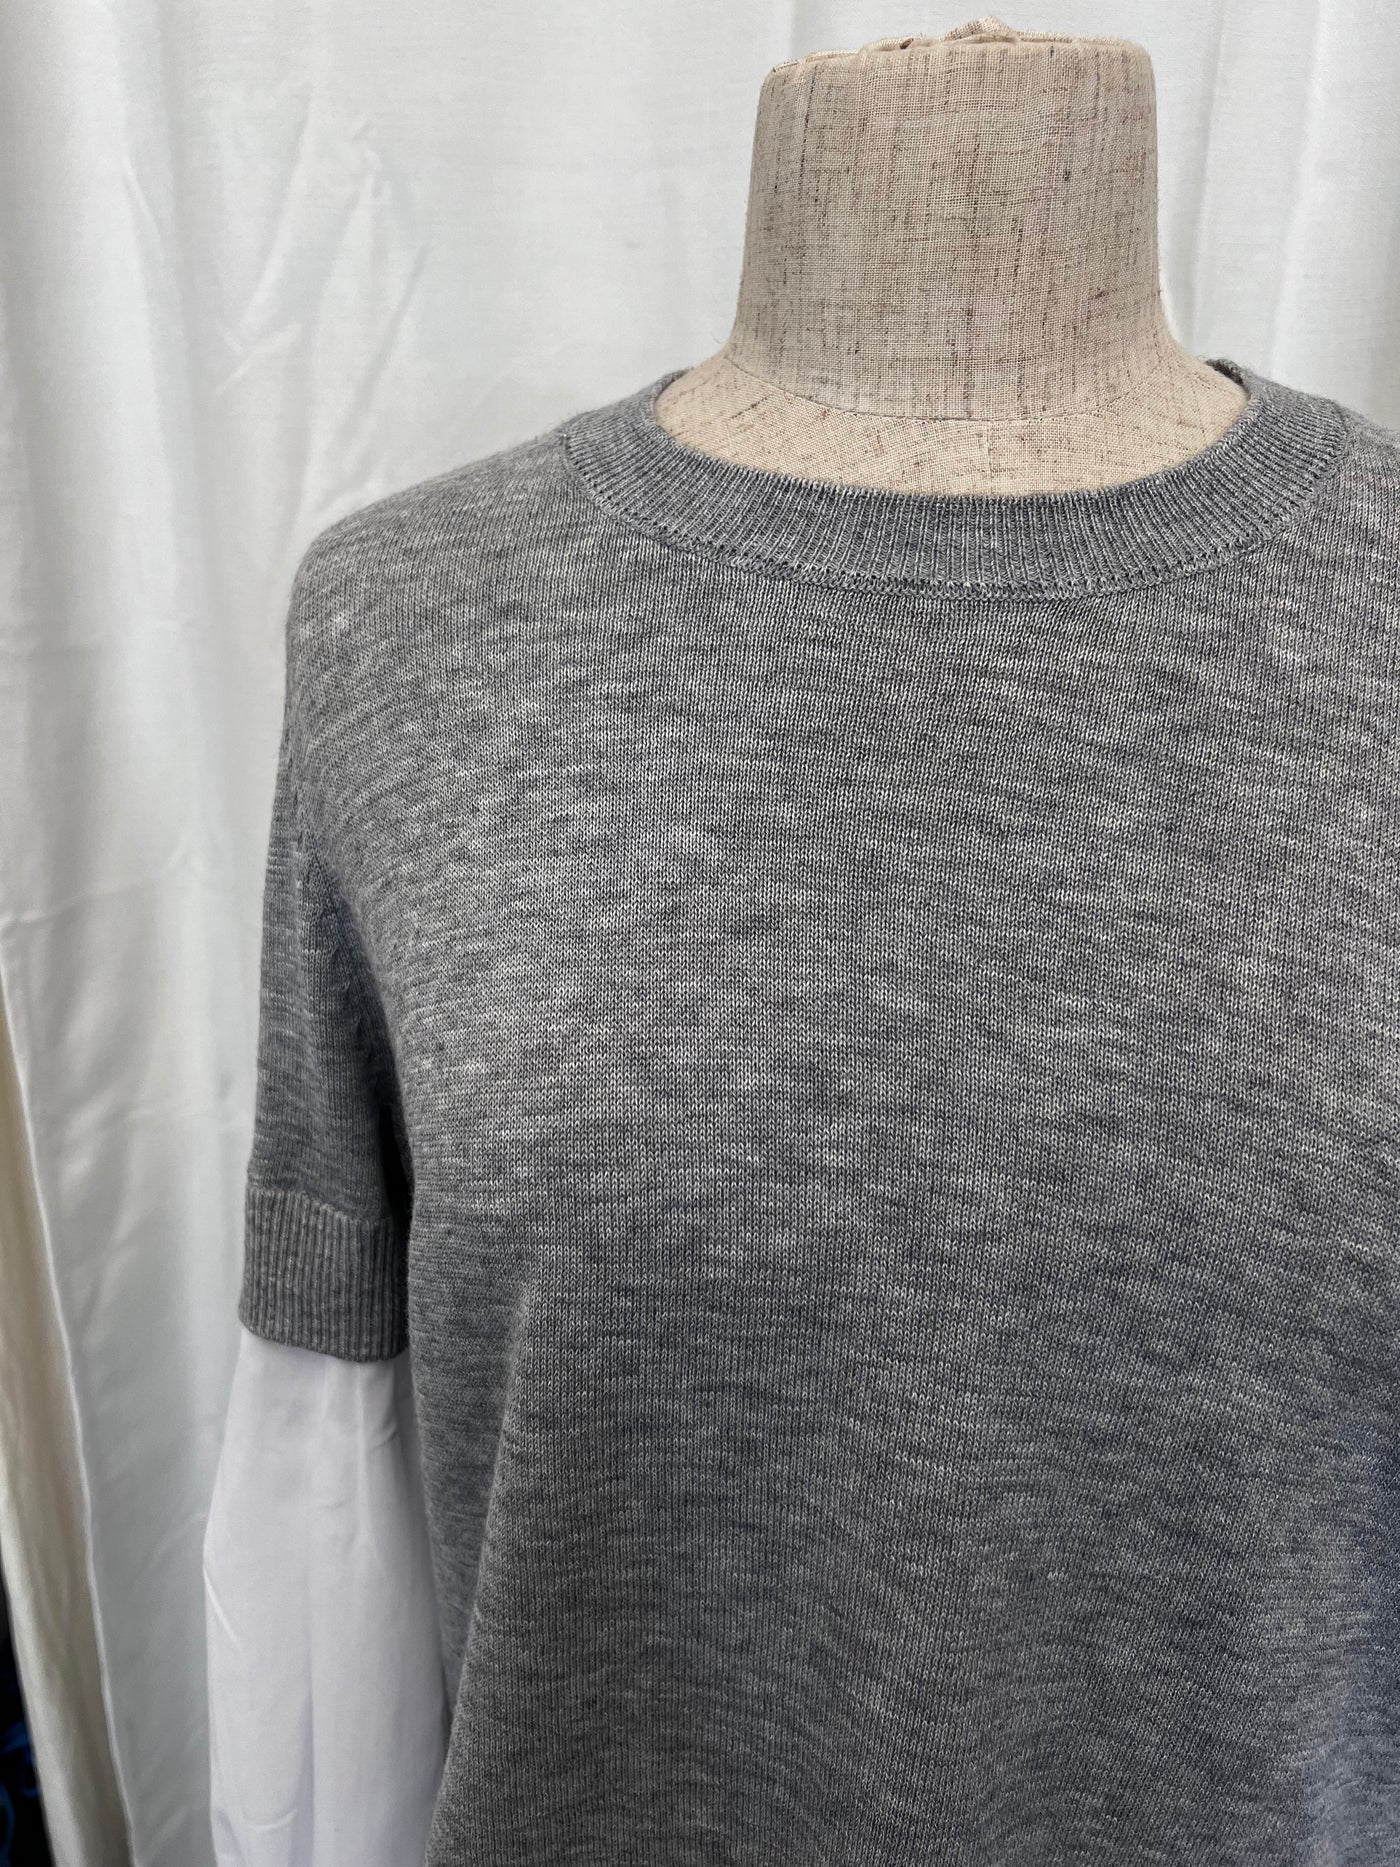 Puff & Ready Sweater - Silver Marl/White